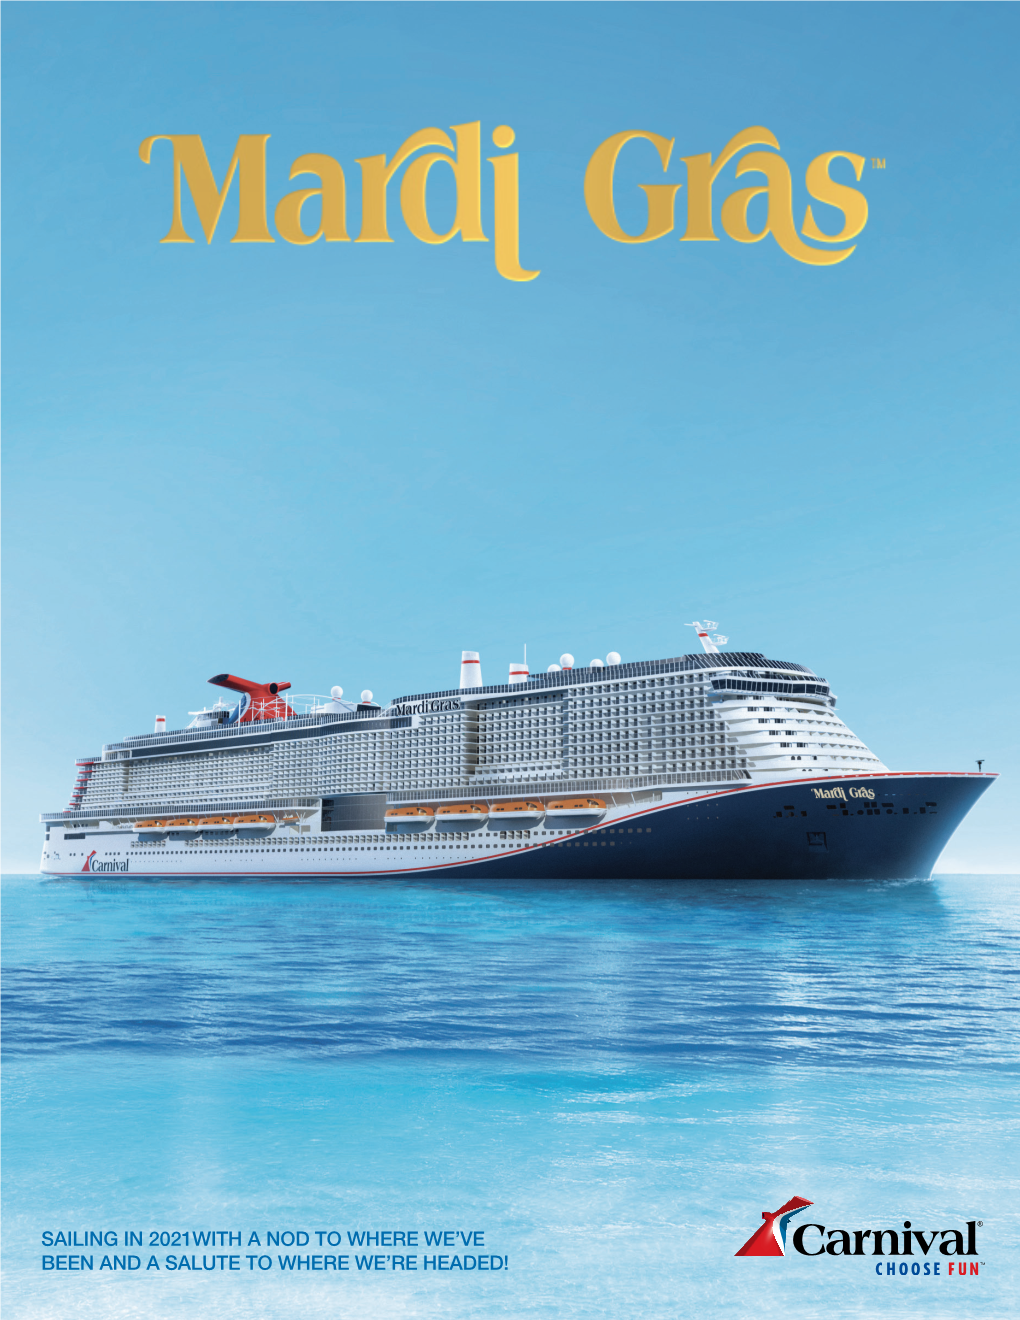 Mardi Gras, Sailing from Port Canaveral in 2021! Your Clients Will Be Able to Experience the Beauty of the Caribbean Aboard Mardi Gras